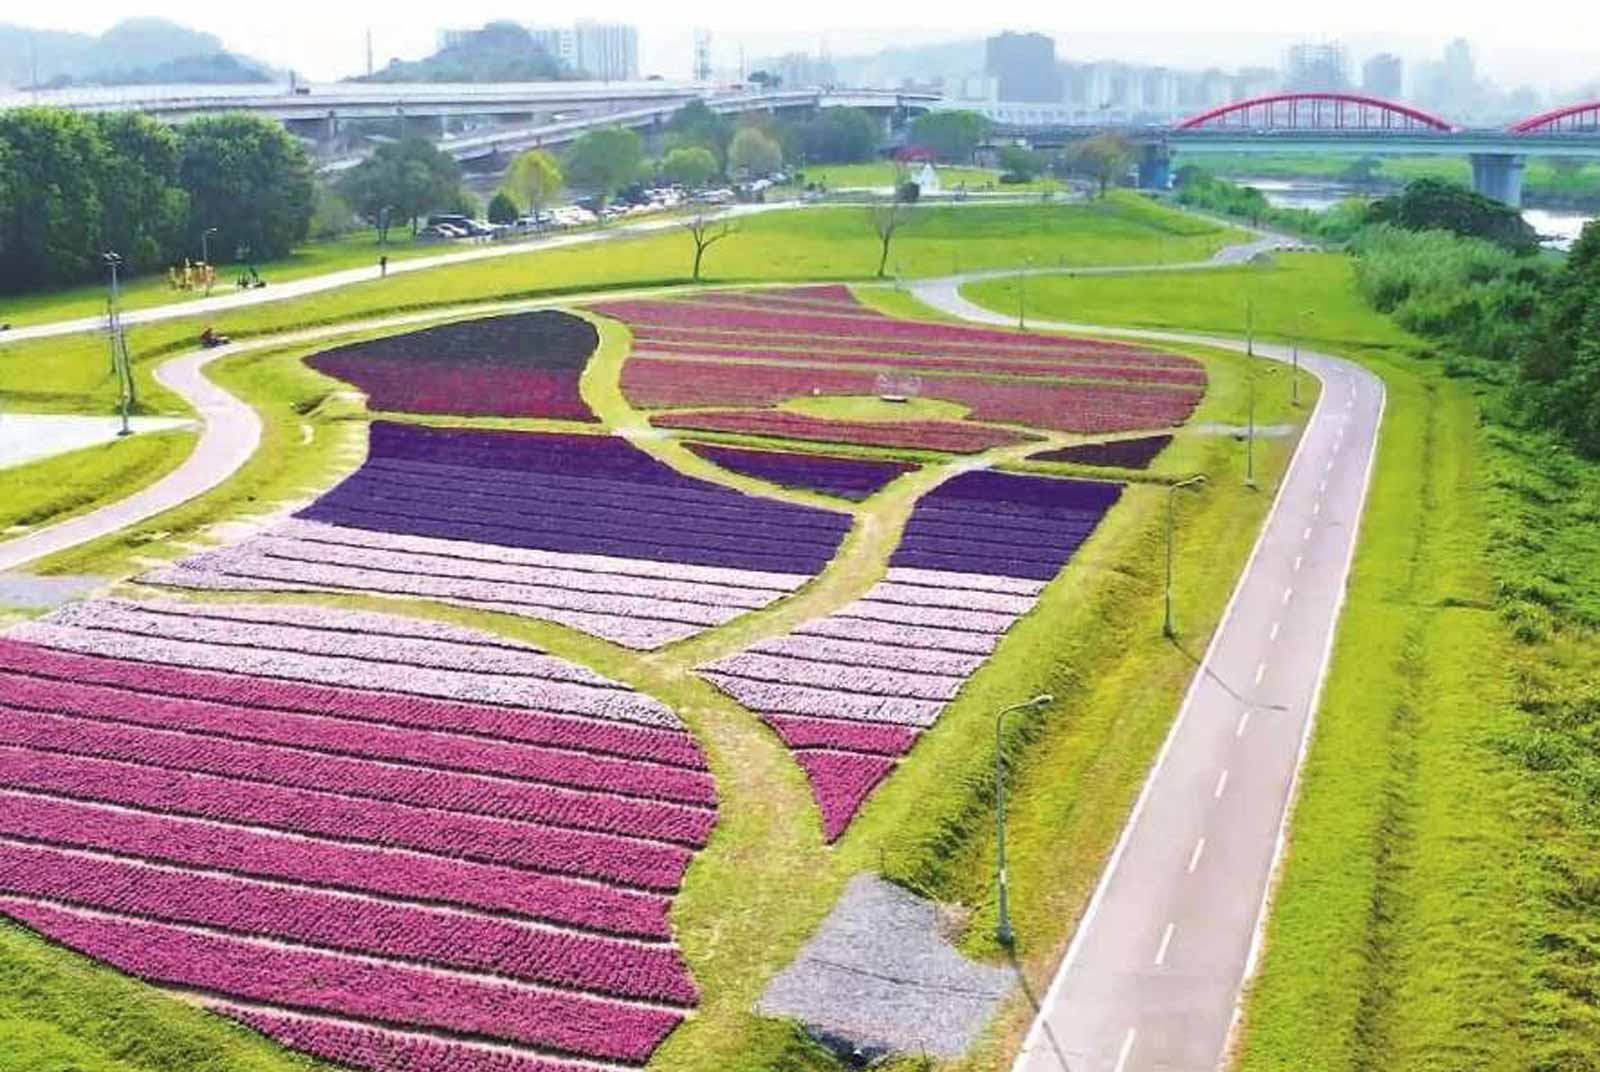 A quest for spring flowers: Purple blossoms throughout Taipei